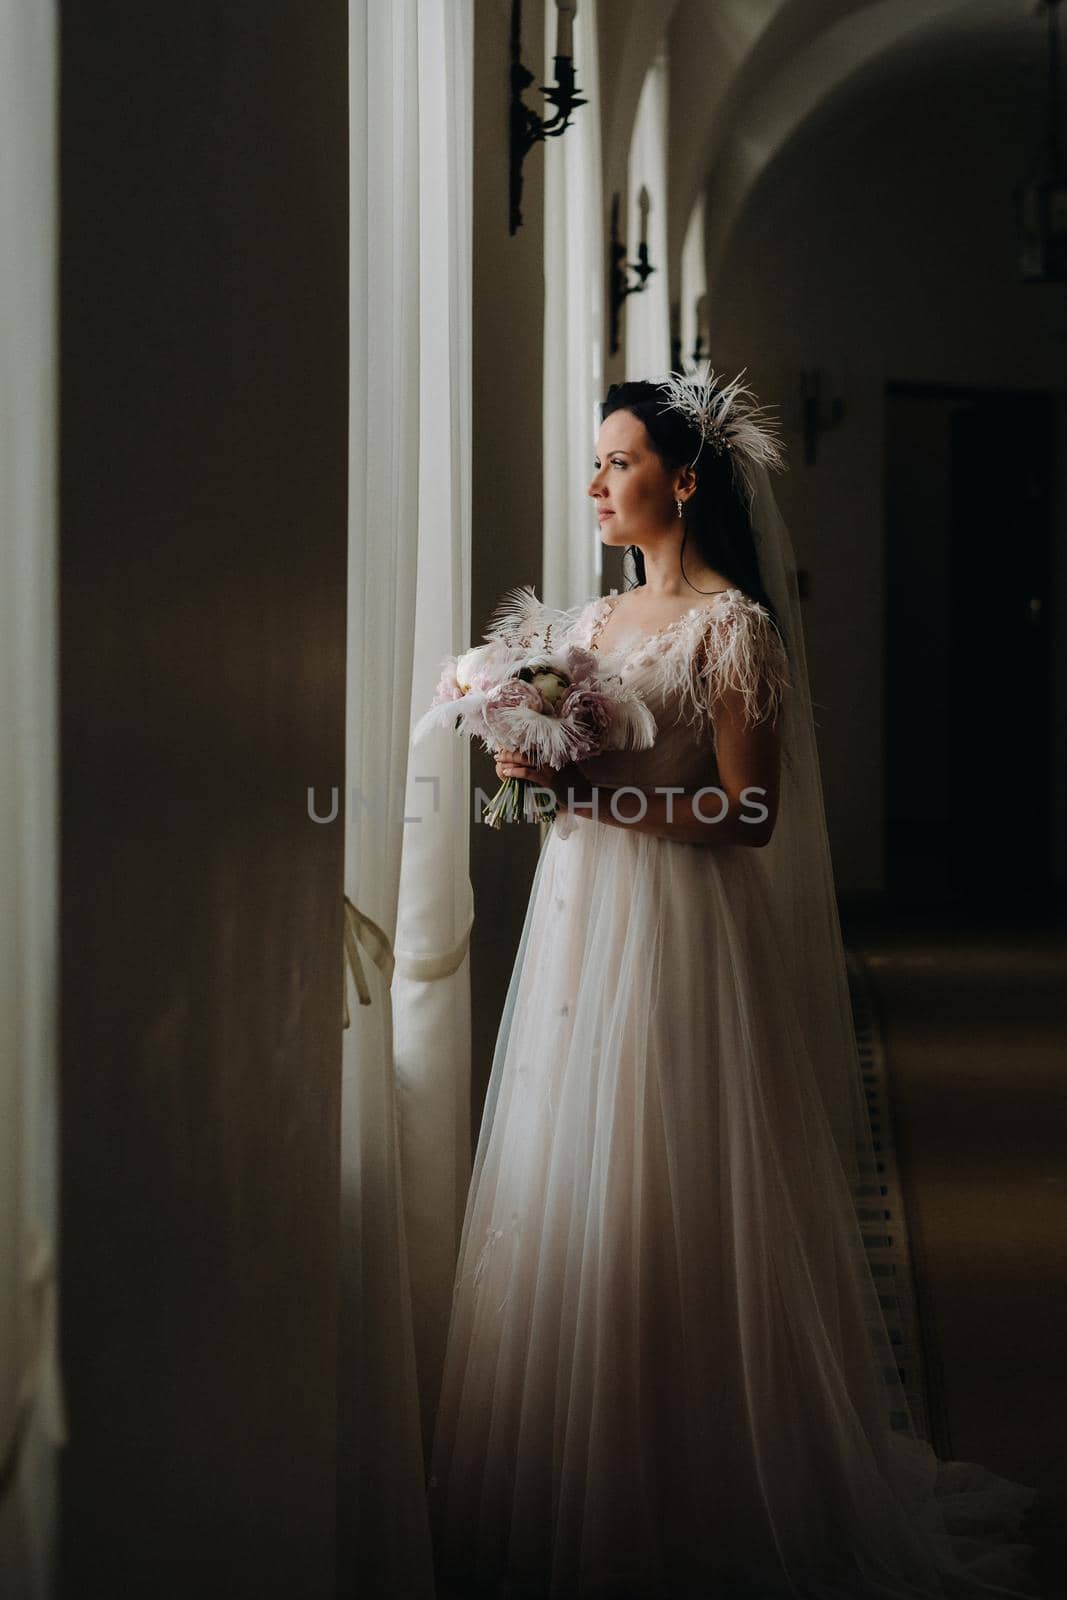 The bride in a wedding dress and with a bouquet stands at the old window and looks.